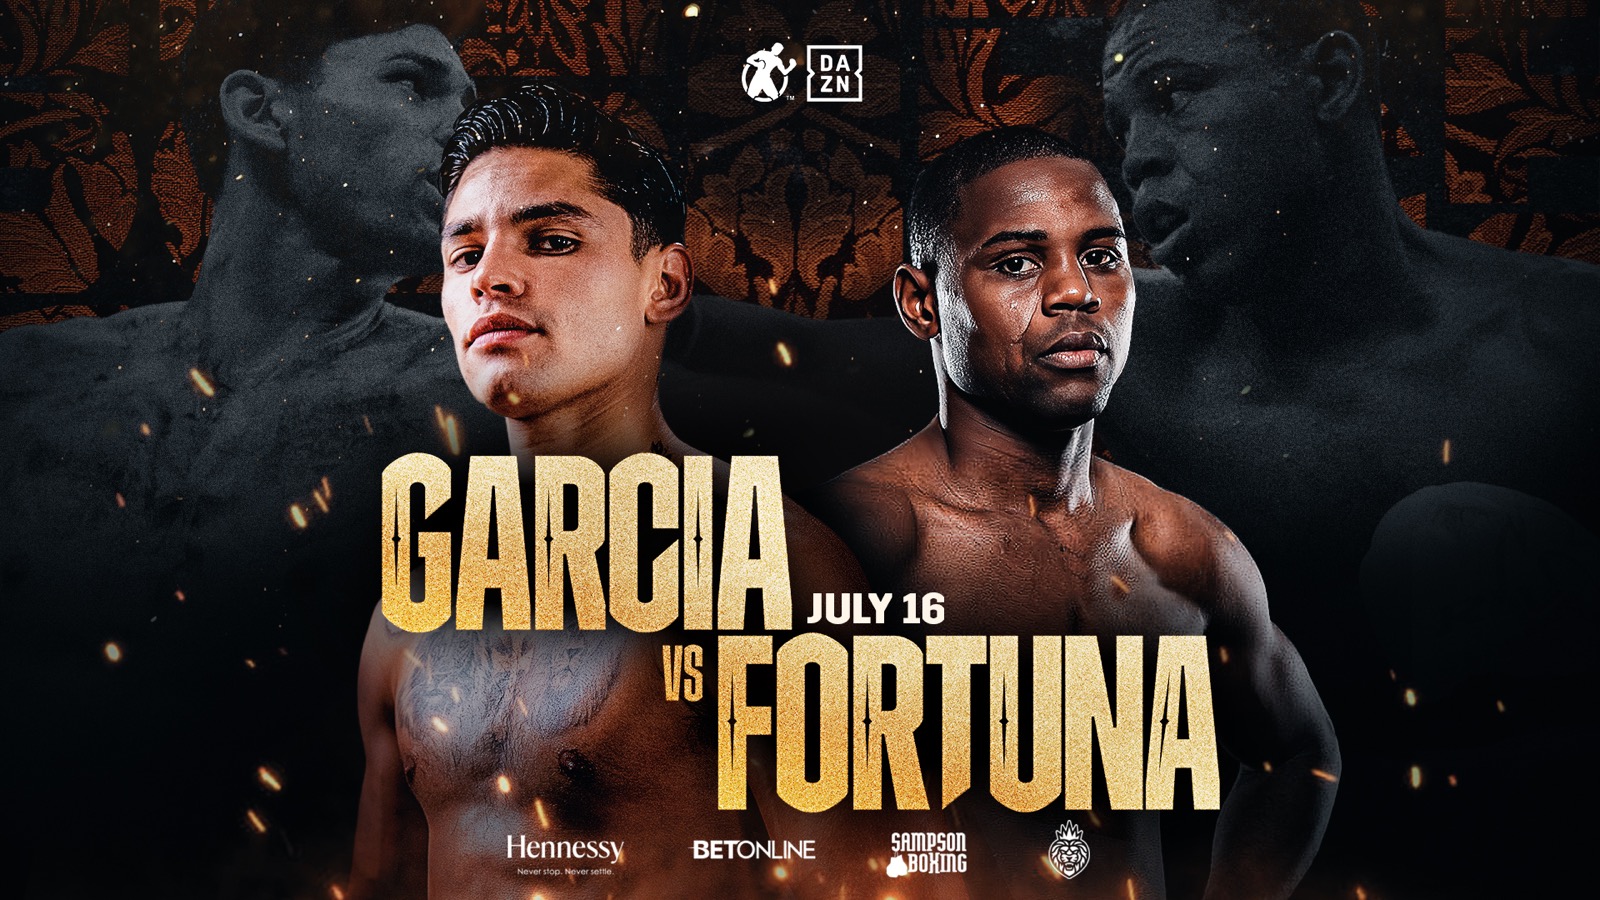 Javier Fortuna says he'll knockout Ryan Garcia on July 16th